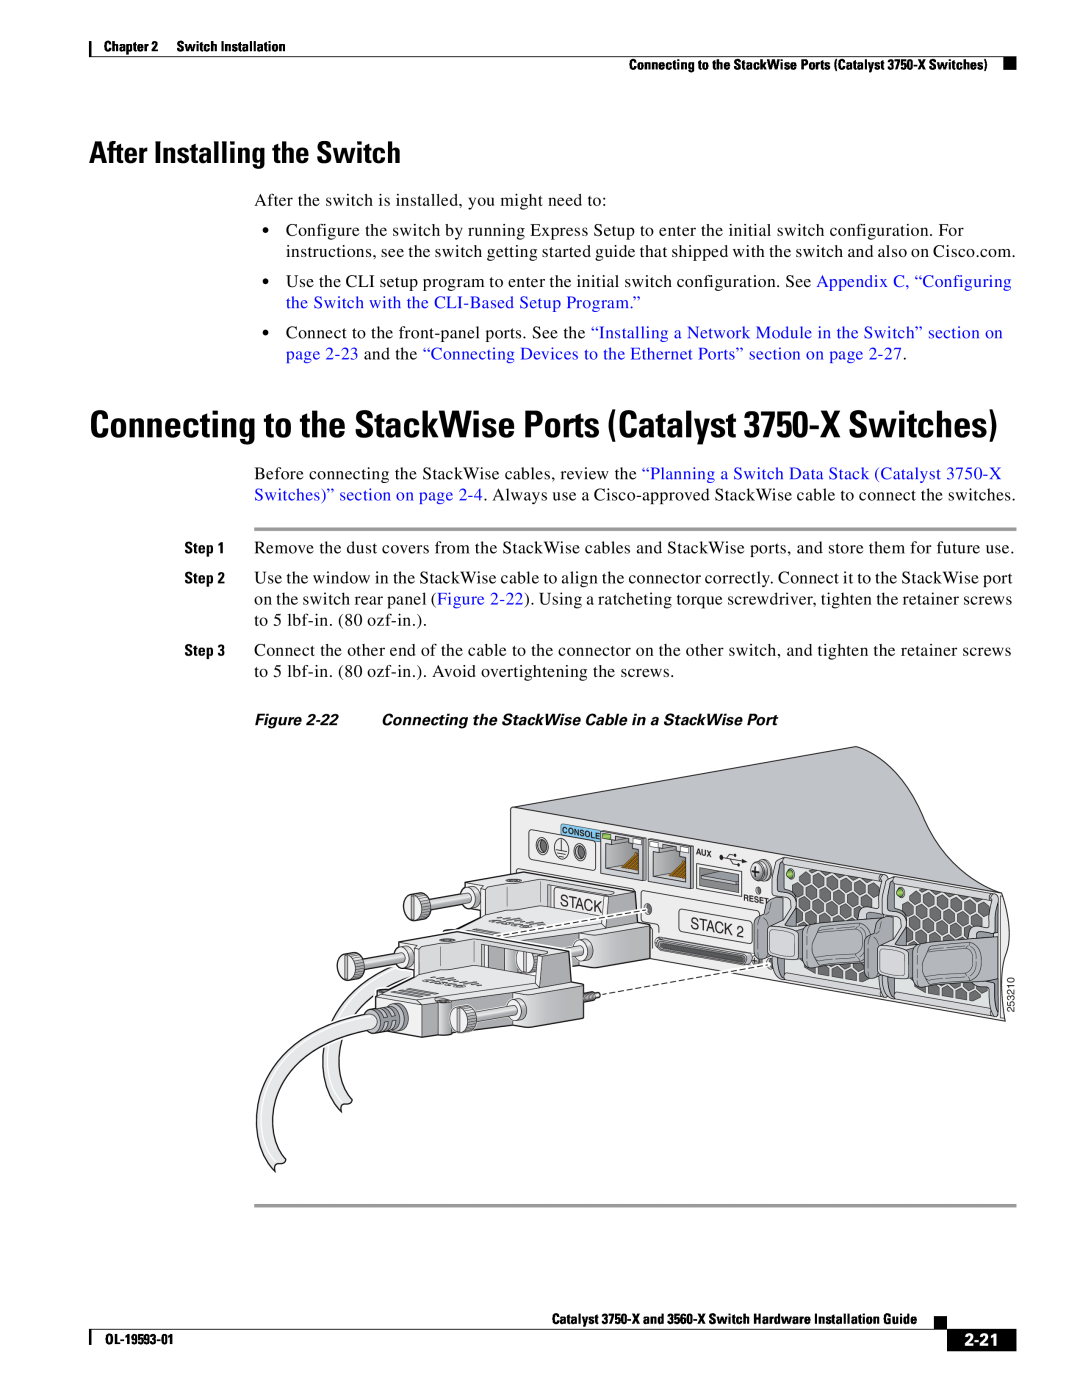 Cisco Systems 3560-X manual Connecting to the StackWise Ports Catalyst 3750-X Switches, After Installing the Switch, 2-21 